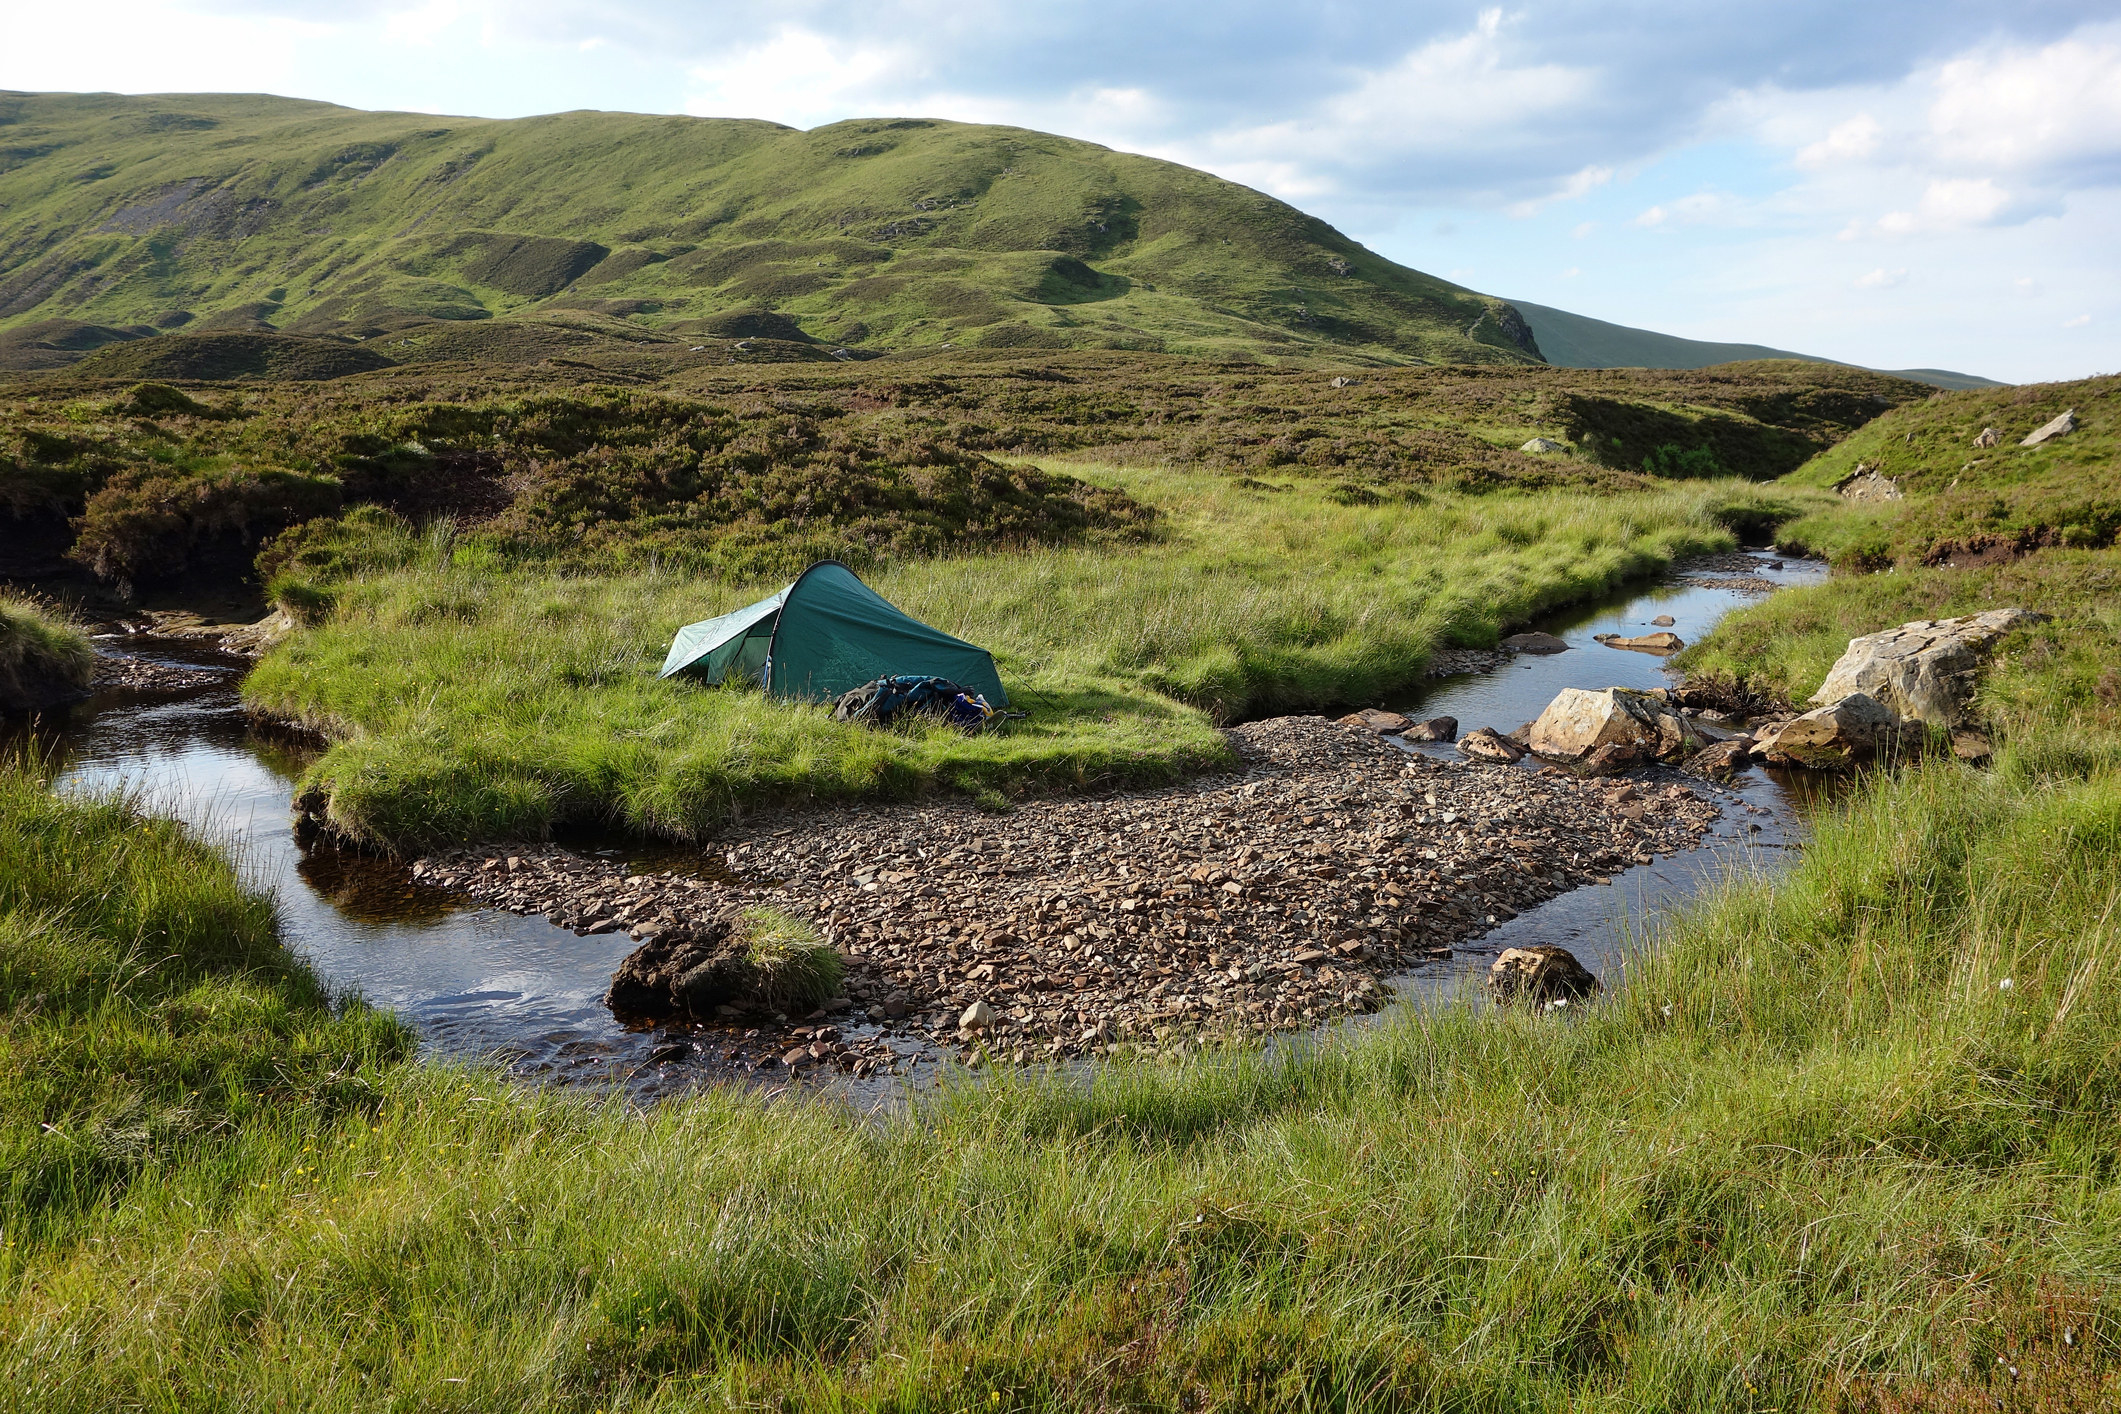 An idyllic wild camping site next to a clear stream.